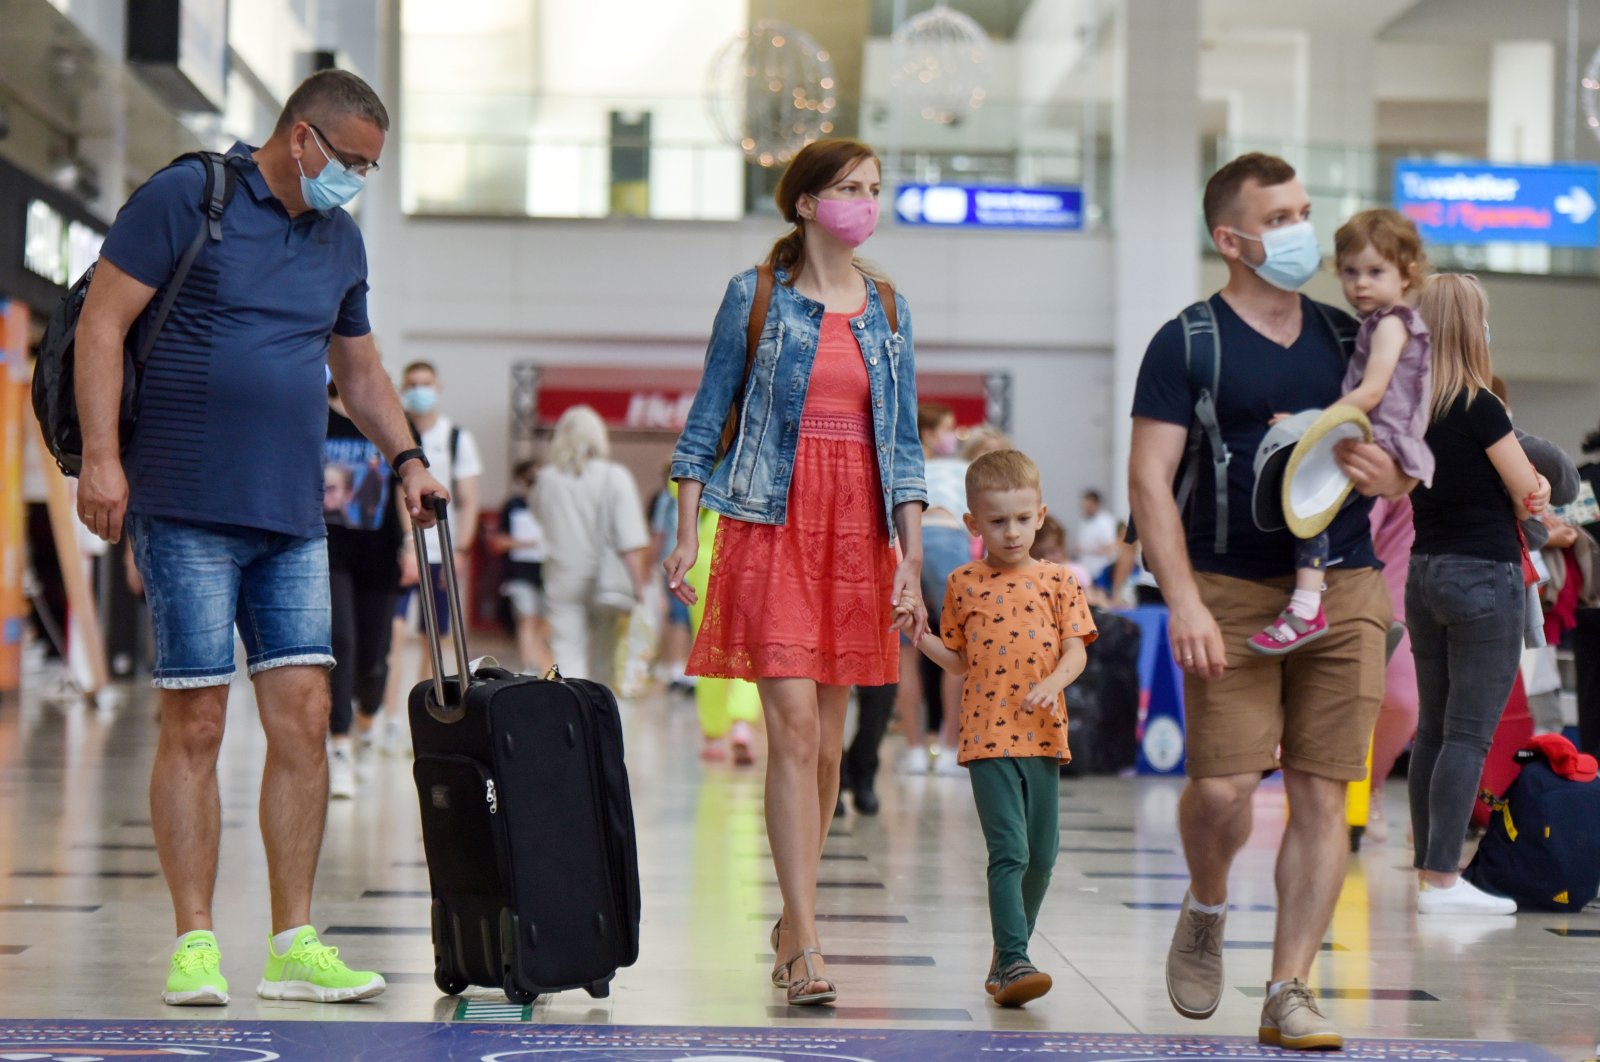 Russian tourists exit the airport as they arrive in Antalya, southern Turkey, June 29, 2021. (IHA Photo)